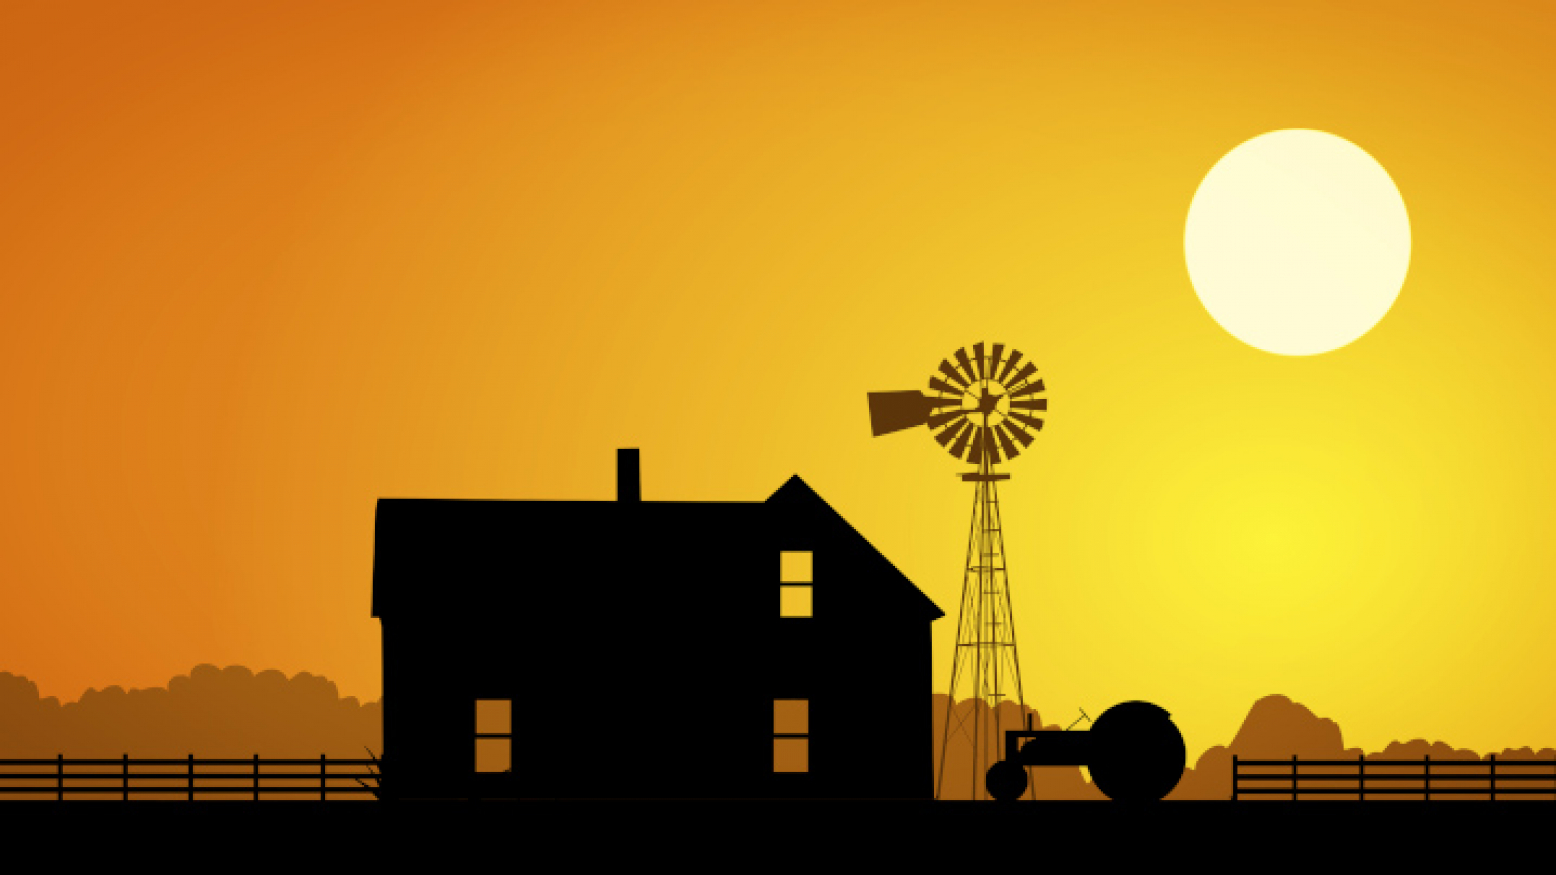 The silhouette of a farm house, windmill and tractor against a yellow sky